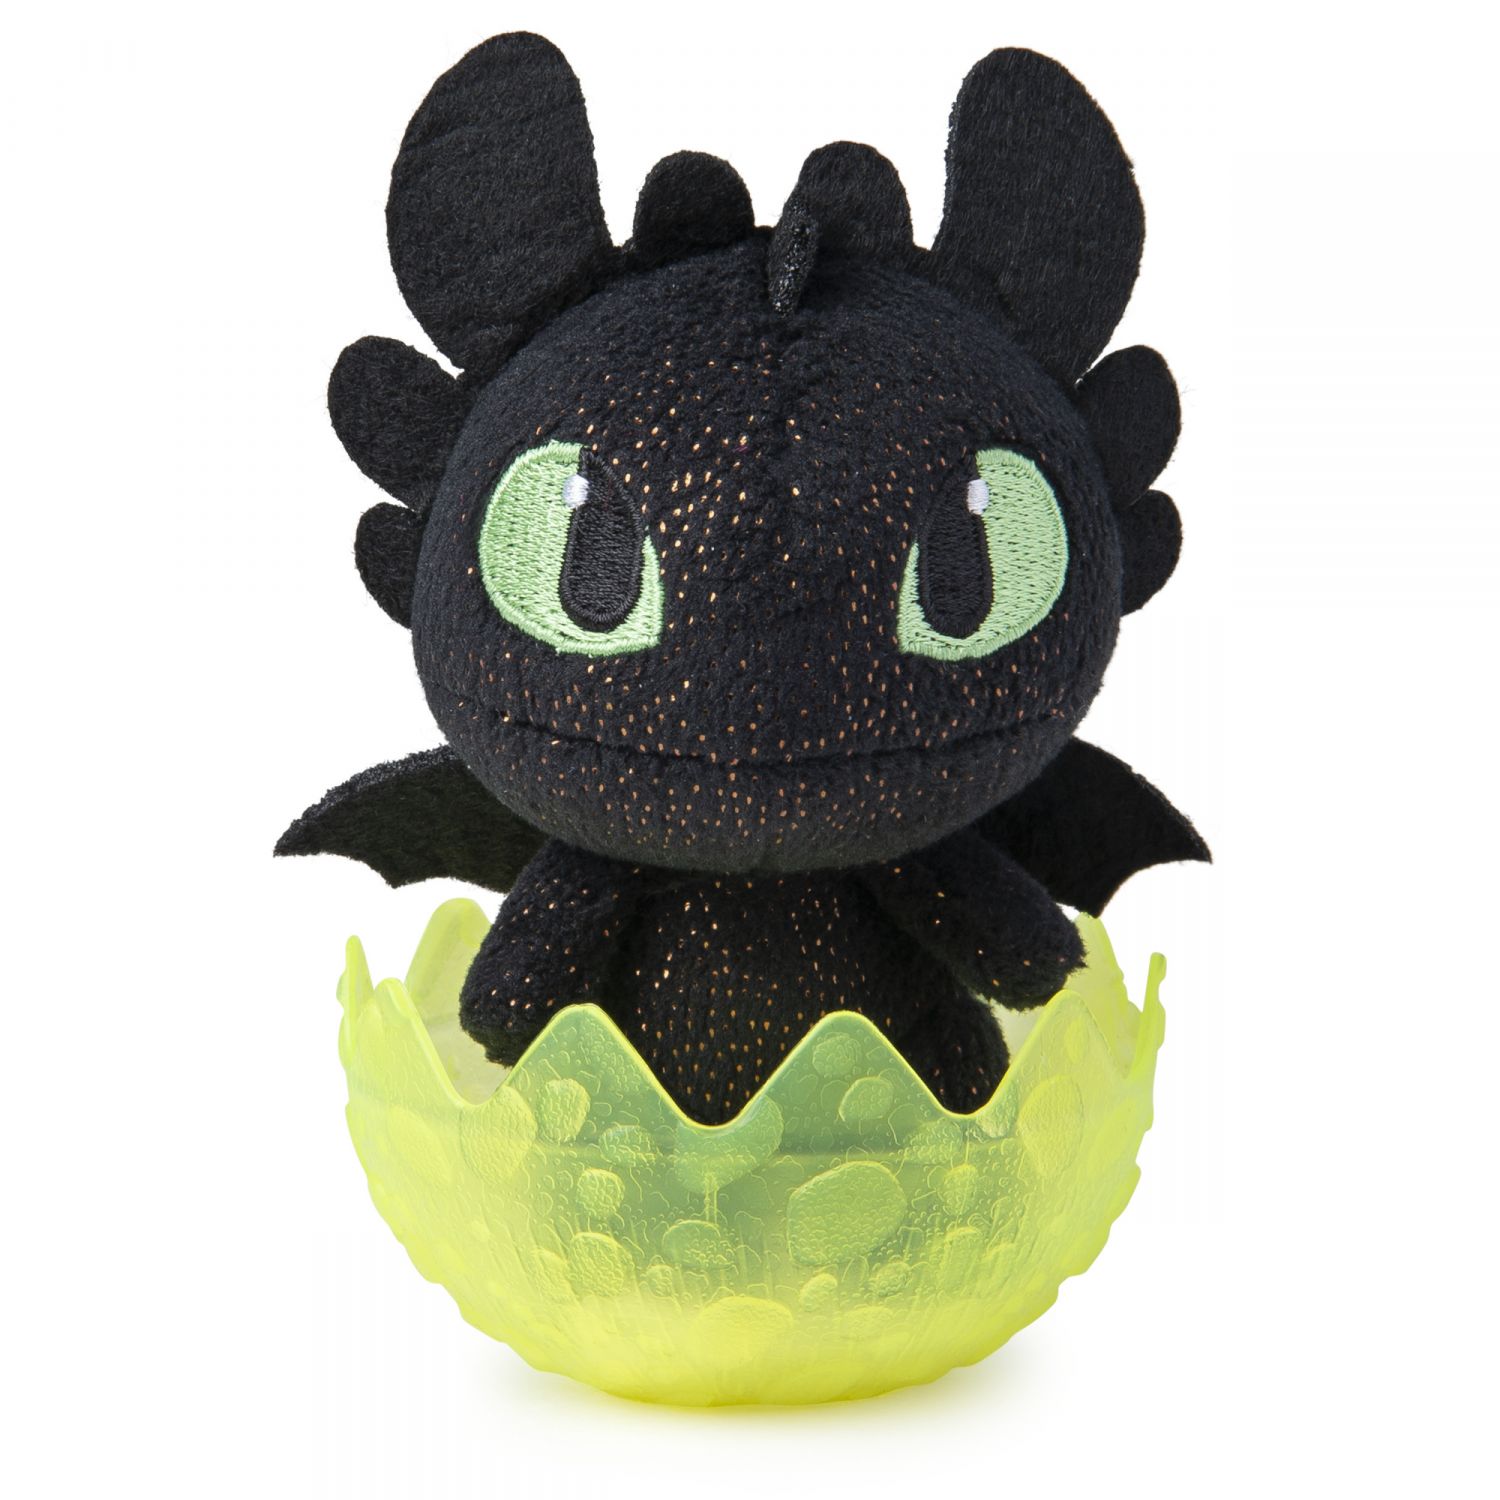 Dragons Plush Asst - Moons Toy Store